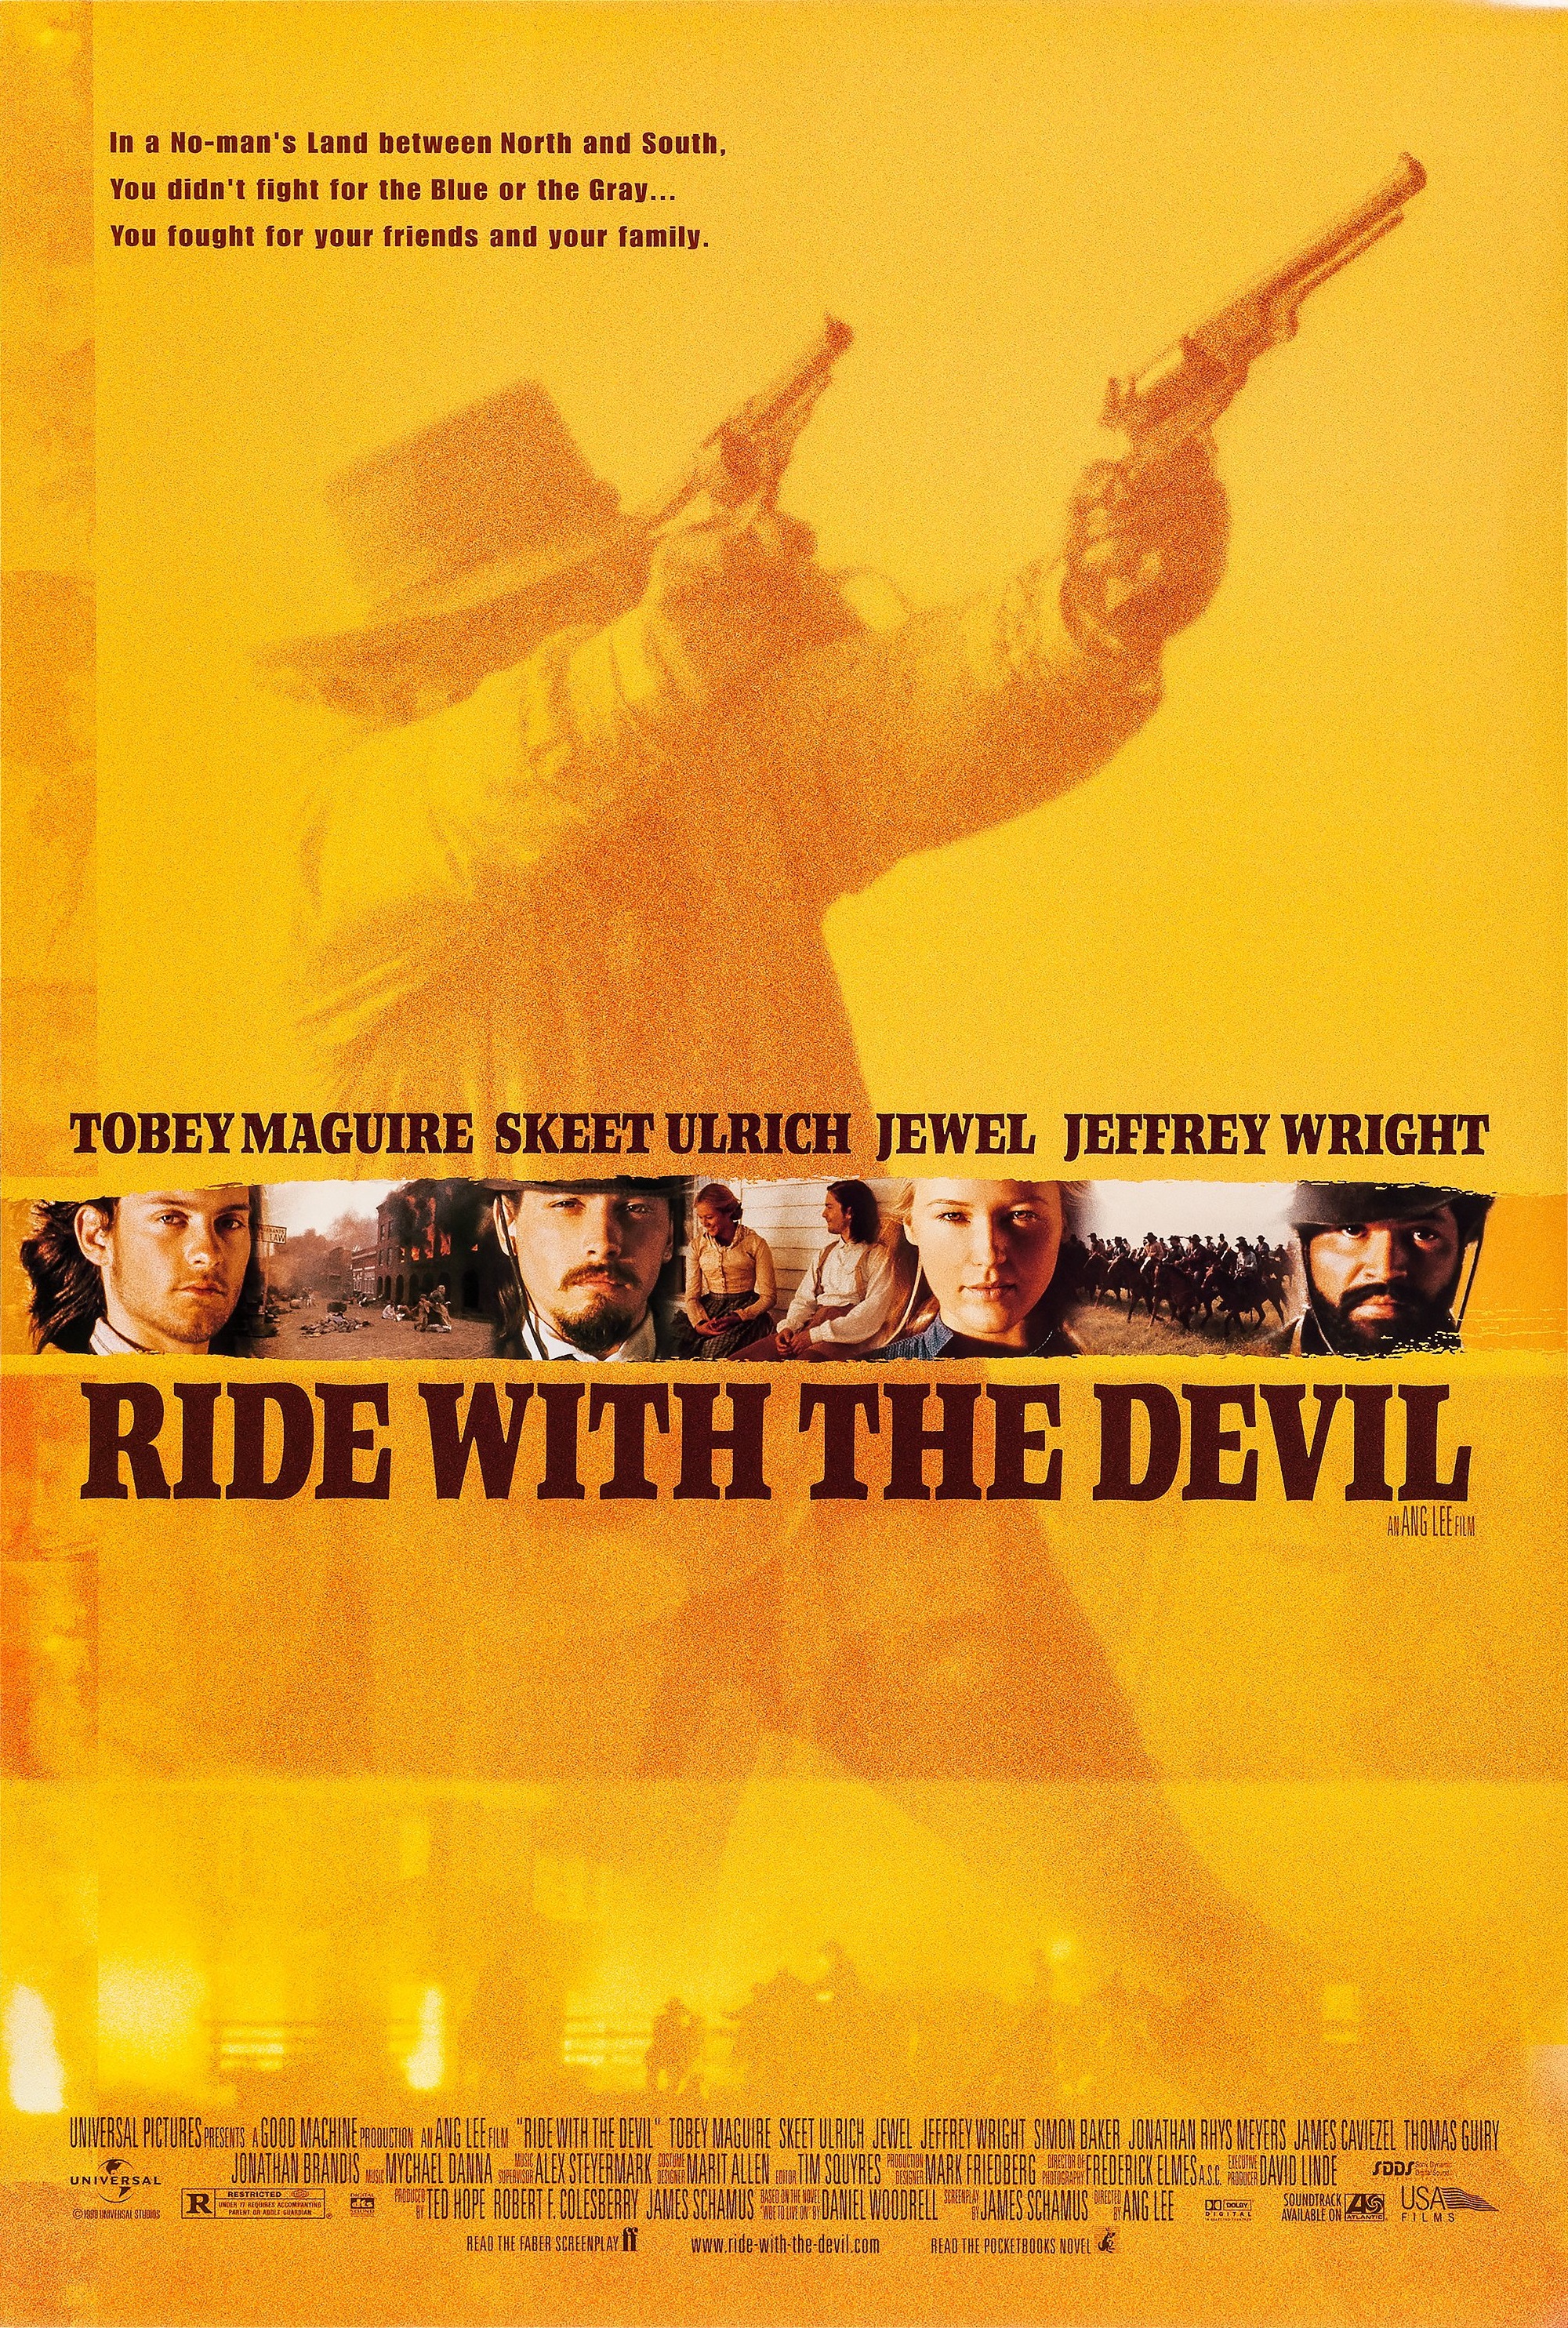 Ride with the Devil (1999) starring Tobey Maguire on DVD on DVD